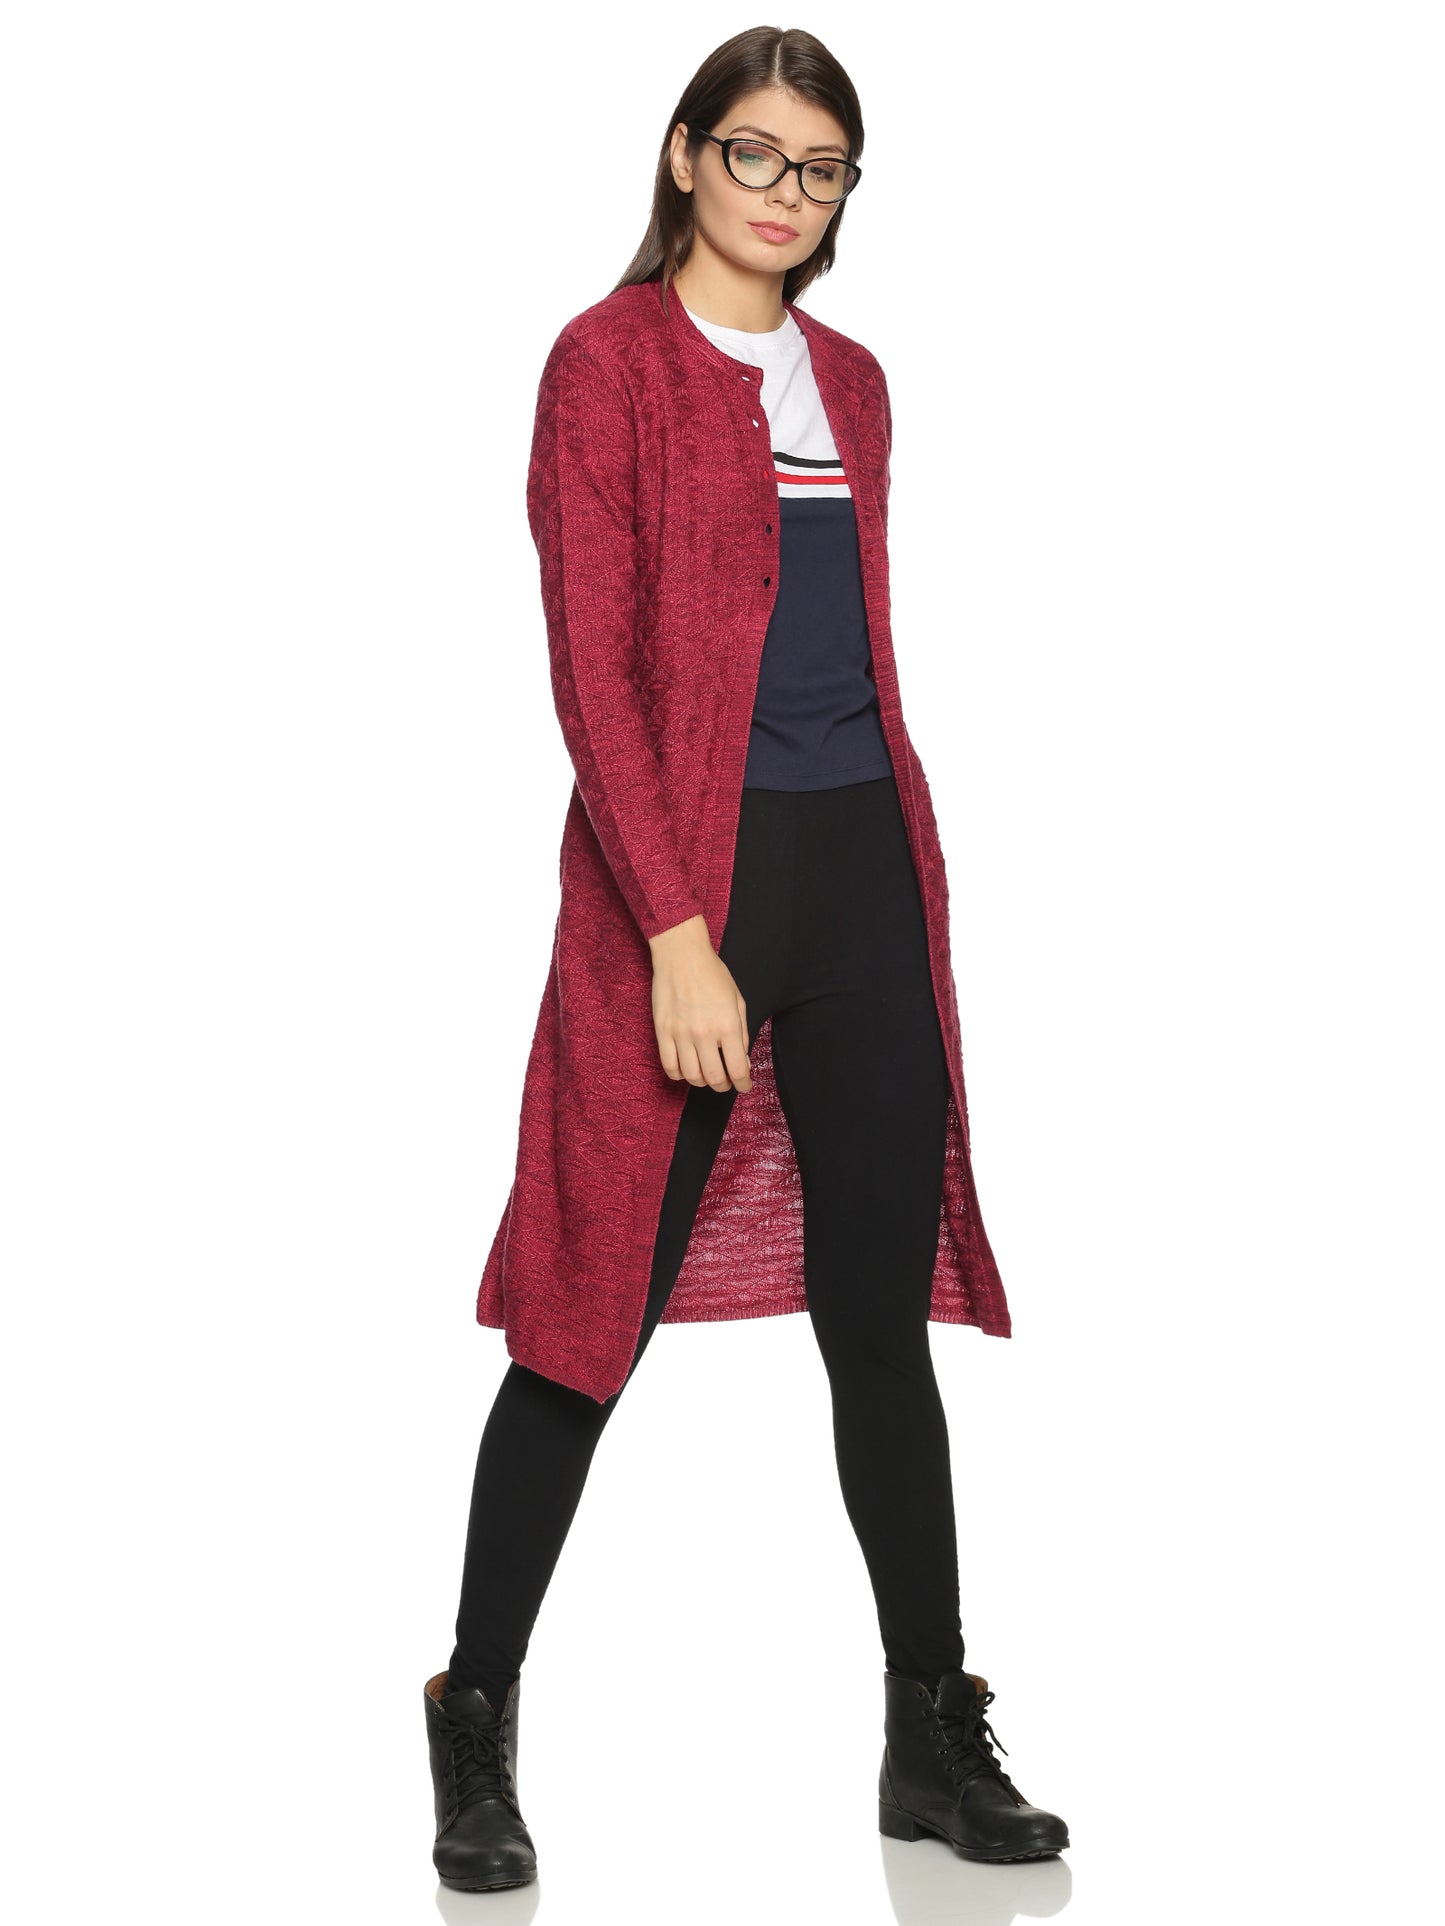 Clapton Acrylic Blend Round Neck Full Sleeve Casual Solid Winter Wear Cardigans For Women Onion